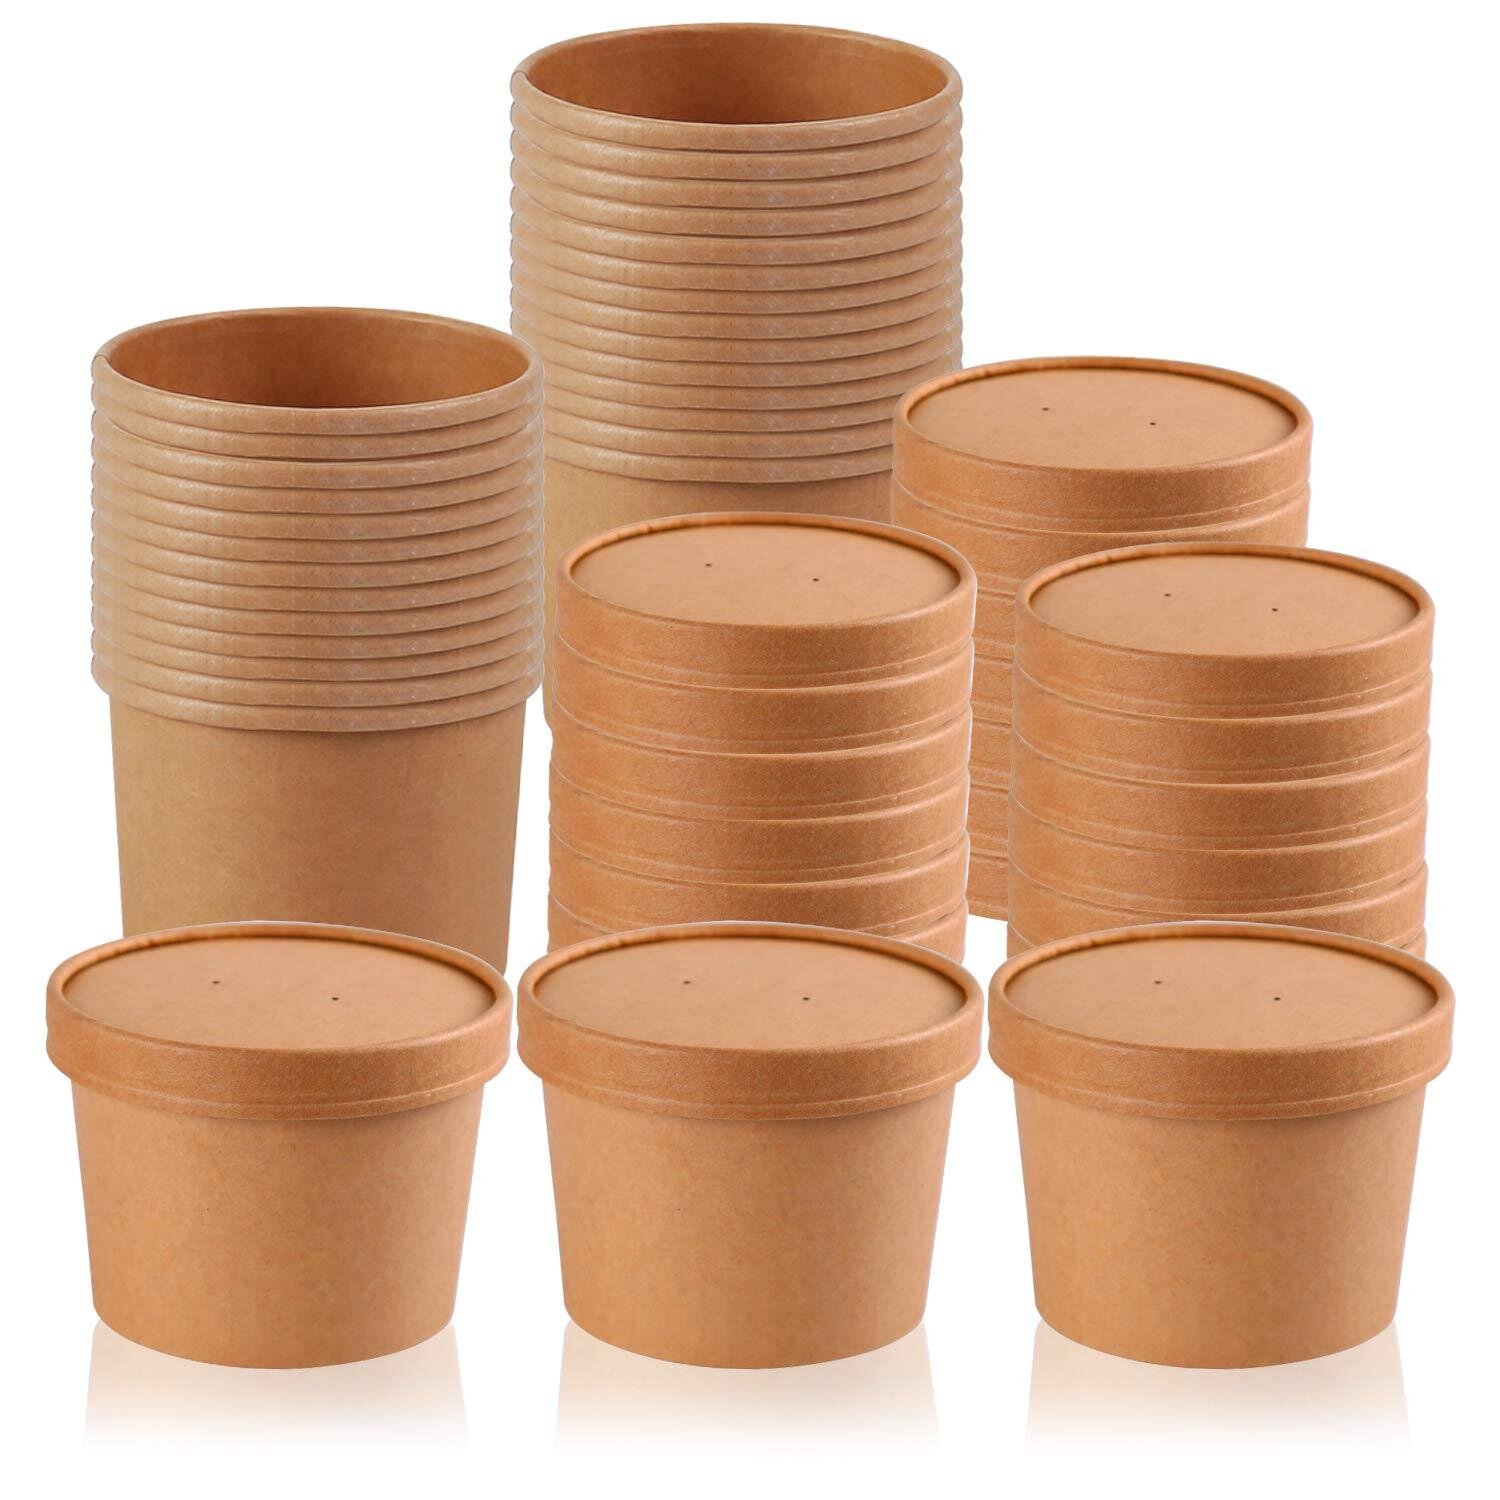 Download Spicymedia 30 Pack 12oz Microwavable Kraft Paper Food Cups Disposable Soup Cups With Lids Soup Bowls With Lids Soup Containers Disposable To Go Containers For Restaurants Delis Cafes Wayfair